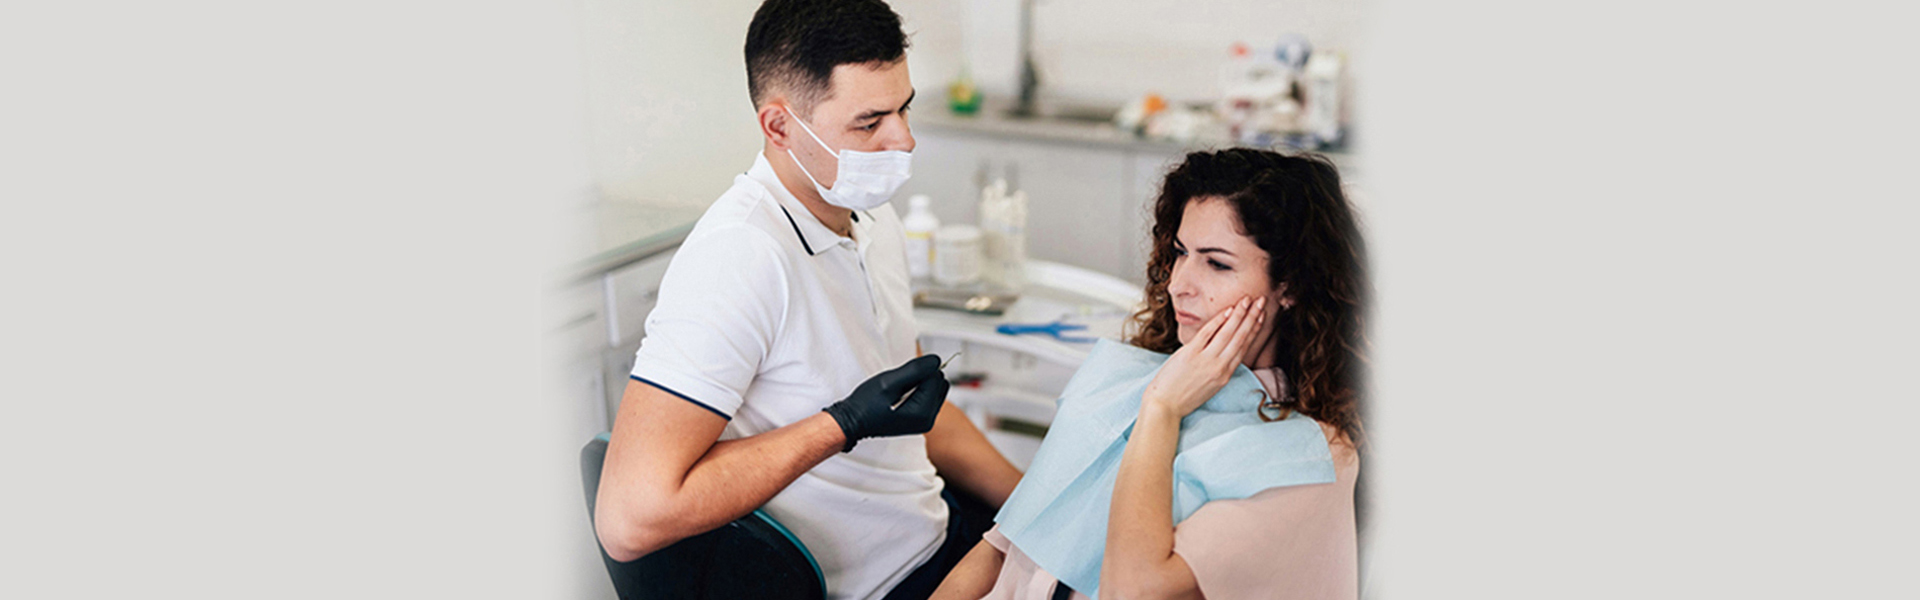 Emergency Dental Services: What to Expect When You Need Immediate Care